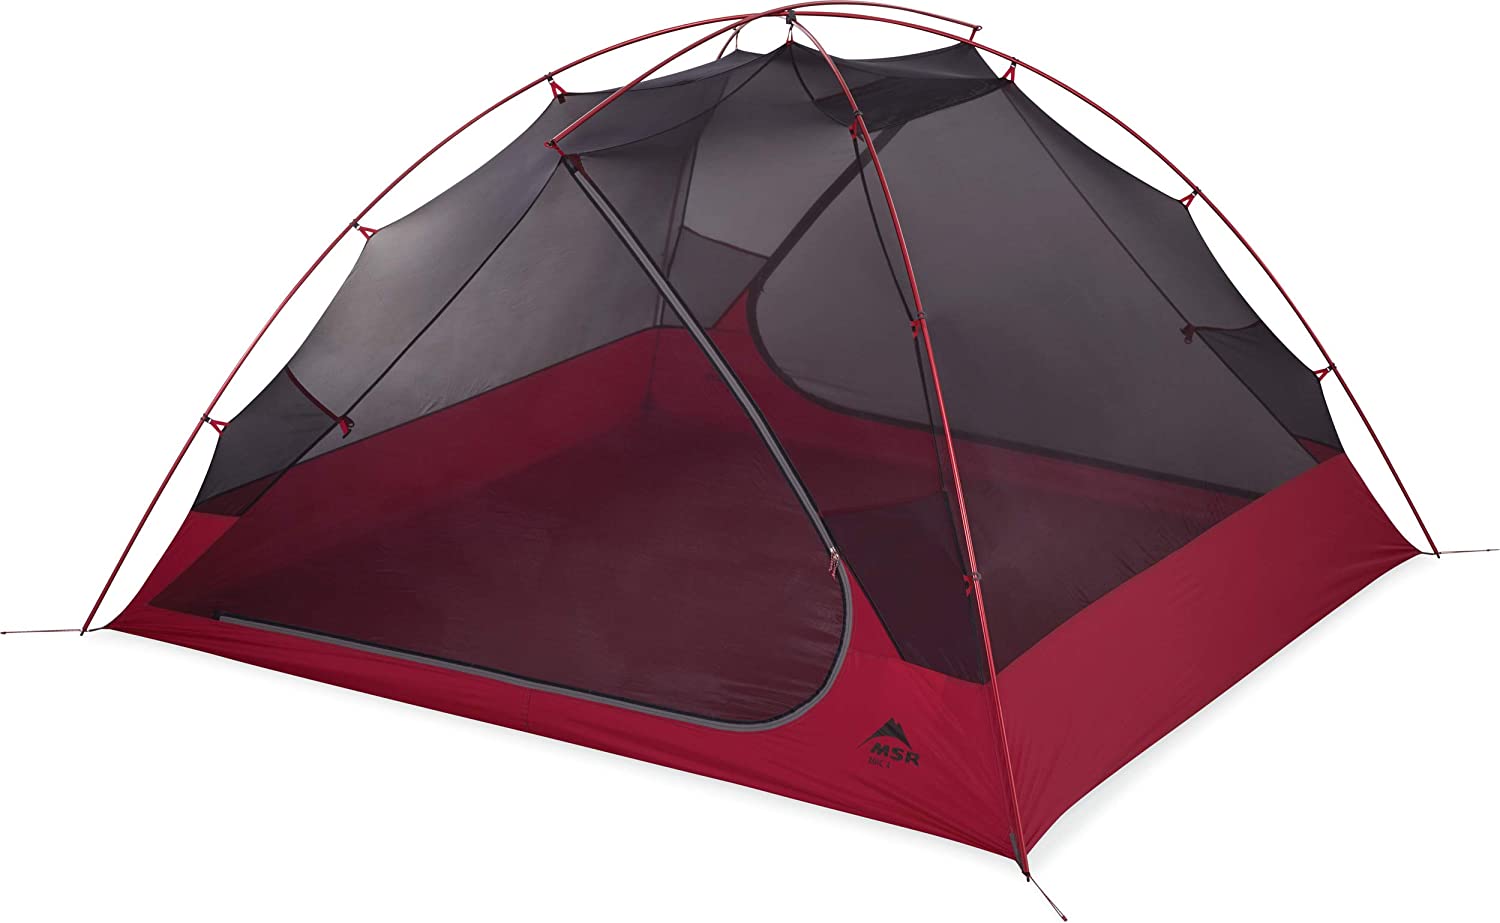 MSR Zoic 4-Person Lightweight Mesh Backpacking Tent with Rainfly